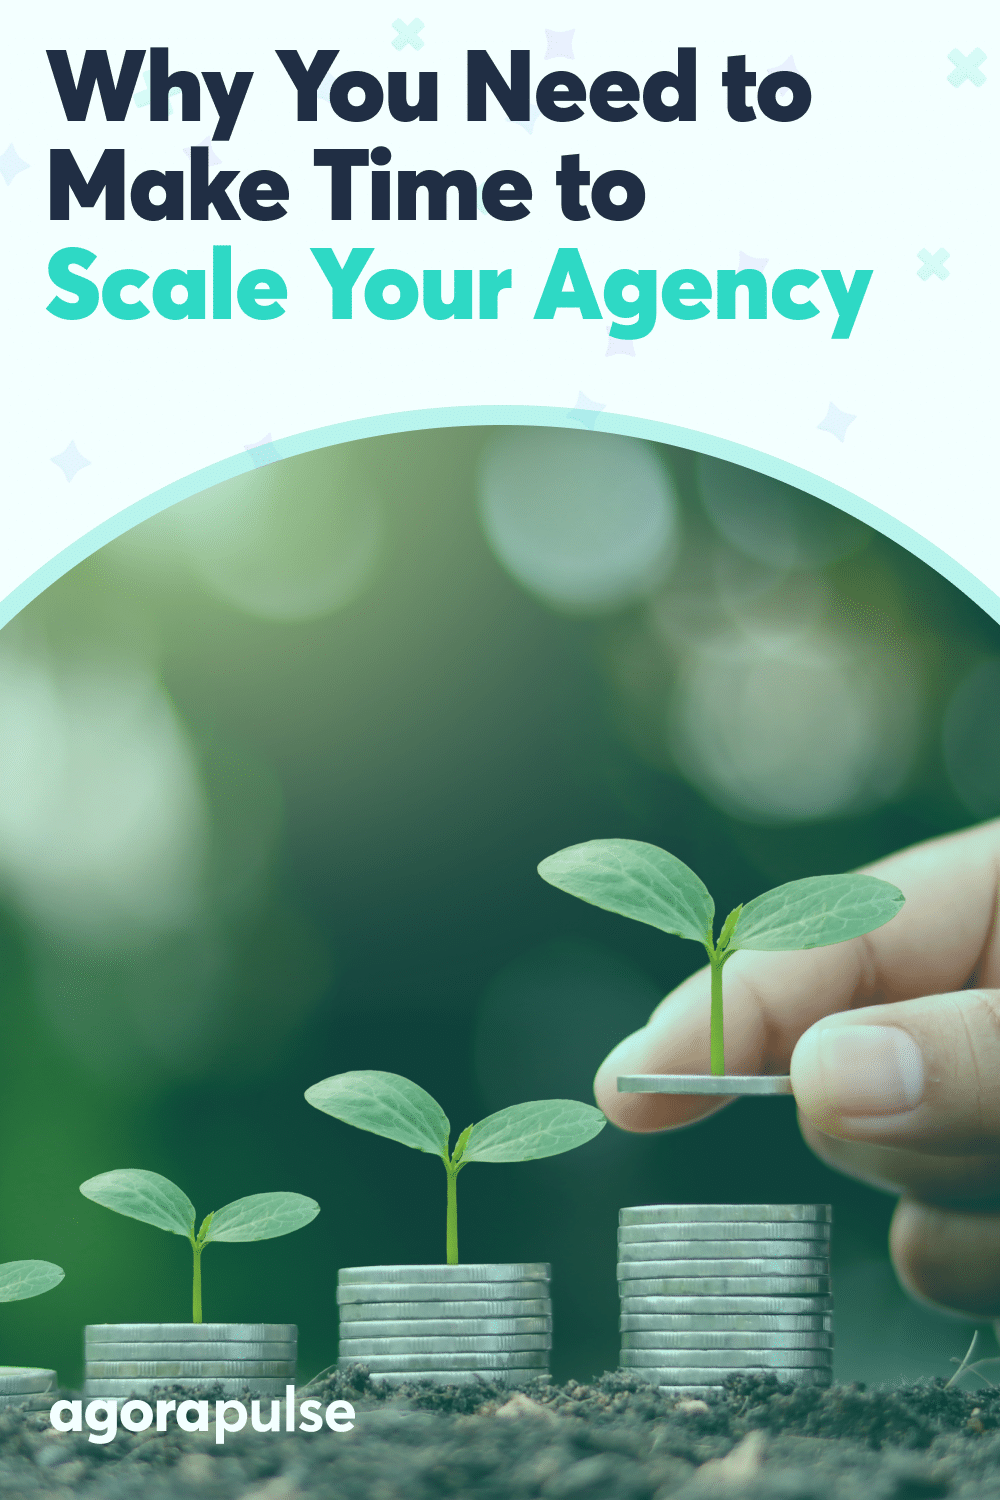 No More Procrastinating: Why You Need to Make Time to Scale Your Agency